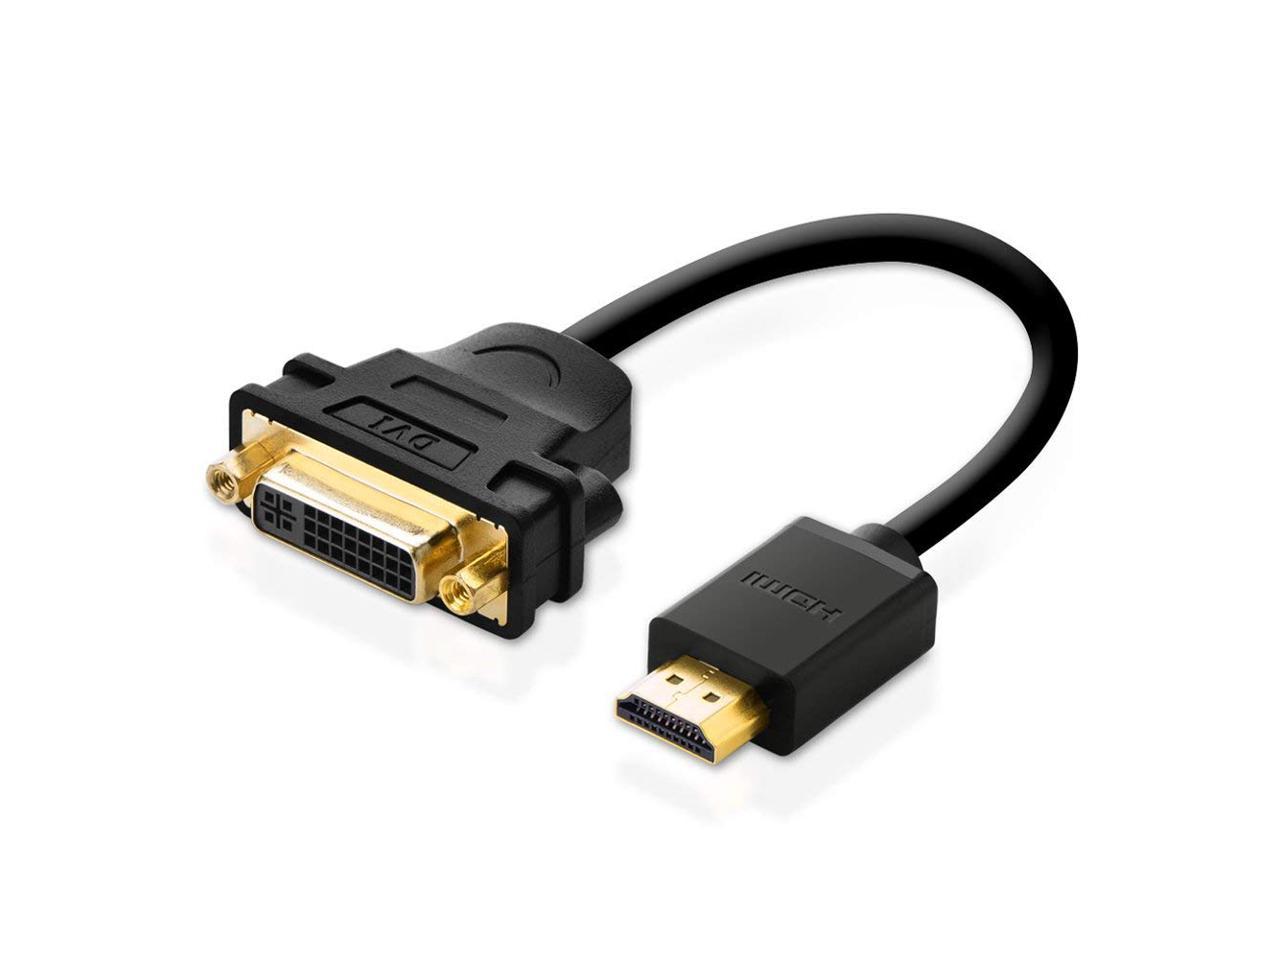 Ugreen ADAPTATEUR HDMI DVI CABLE HDMI FEMELLE VERS DVI MALE CONTACTS OR DORES HD 24+1 